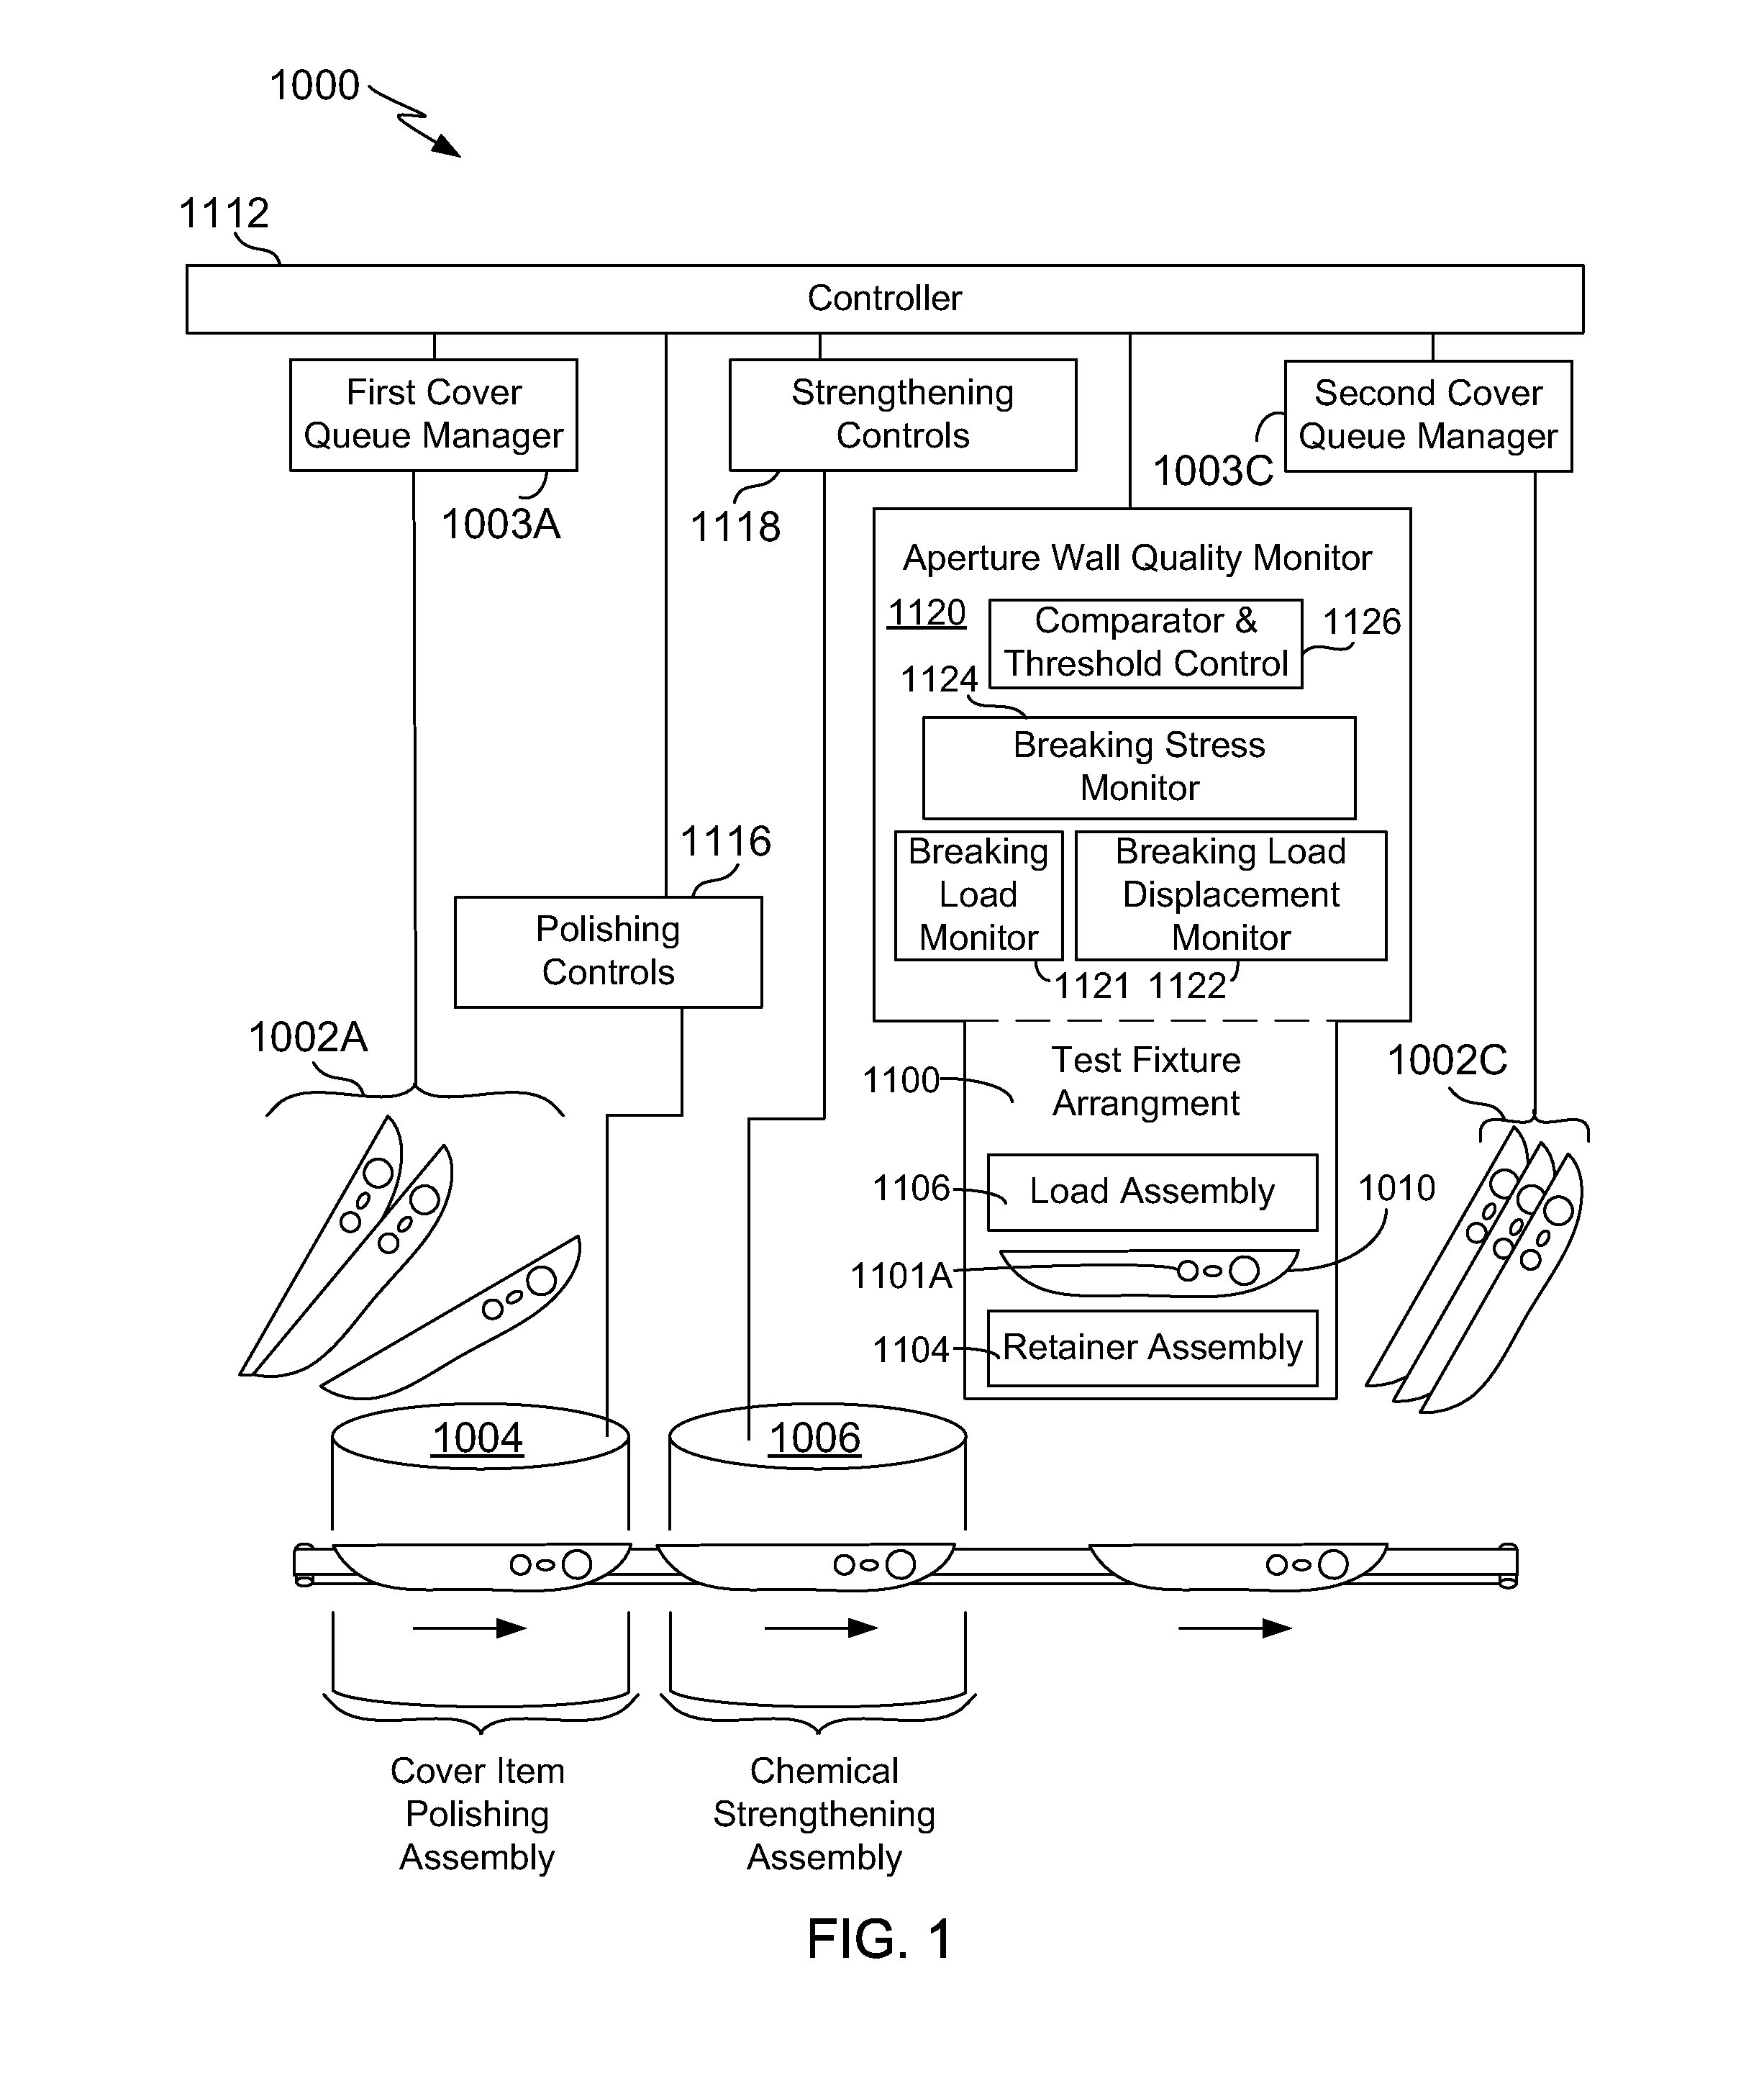 Apparatus and method for breakage testing of small articles